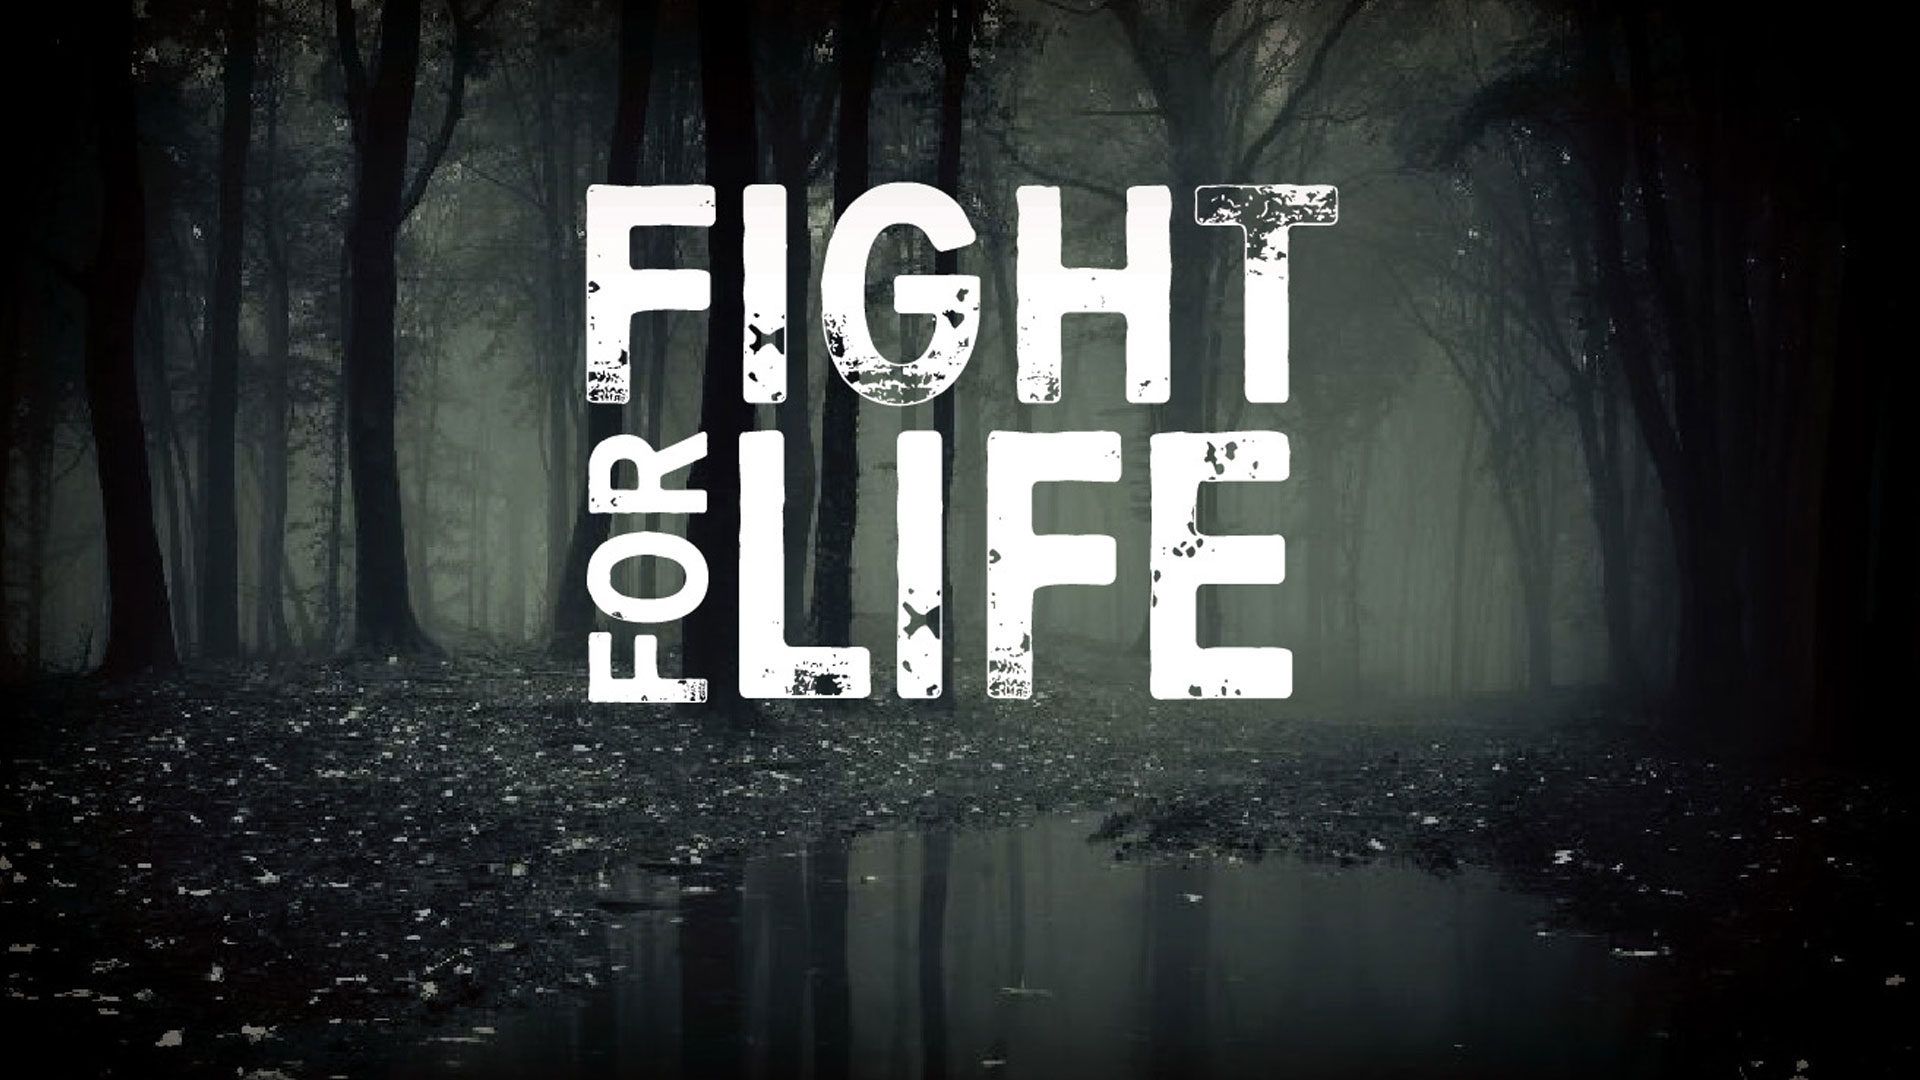 Life is a fight. Fight for Life. Life is Life Fight for it. Fight for Life майка.